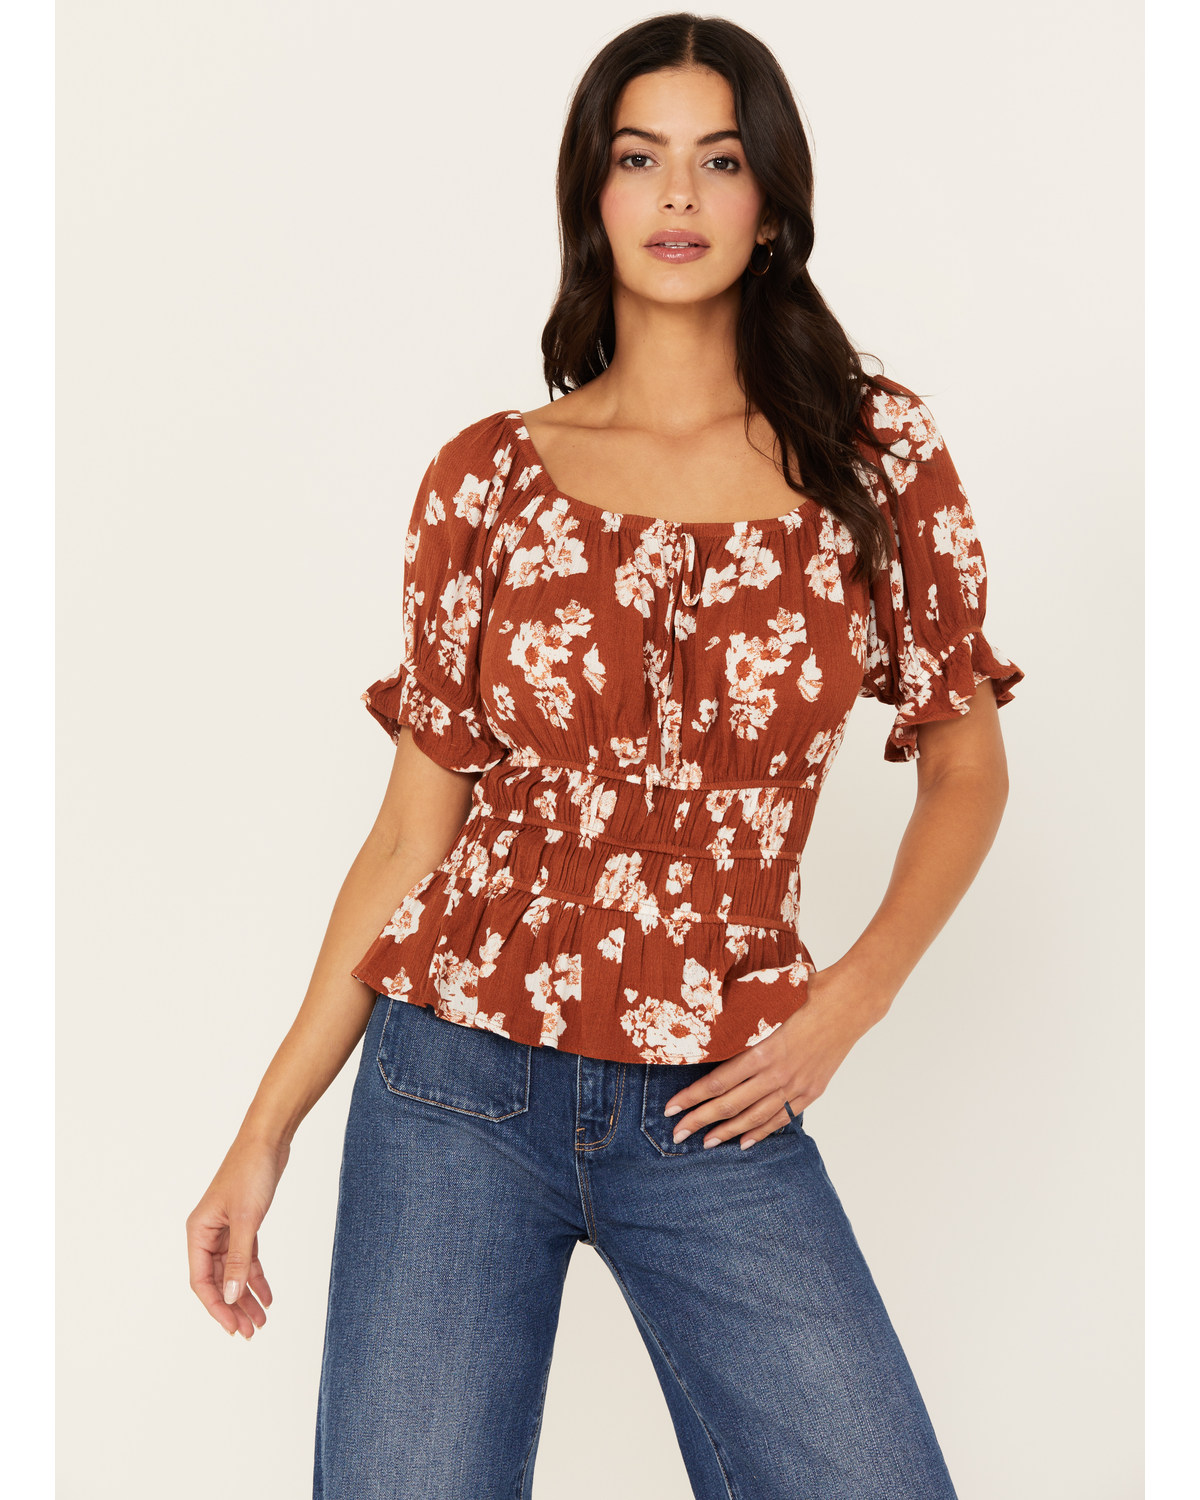 Wild Moss Women's Floral Smocked Top